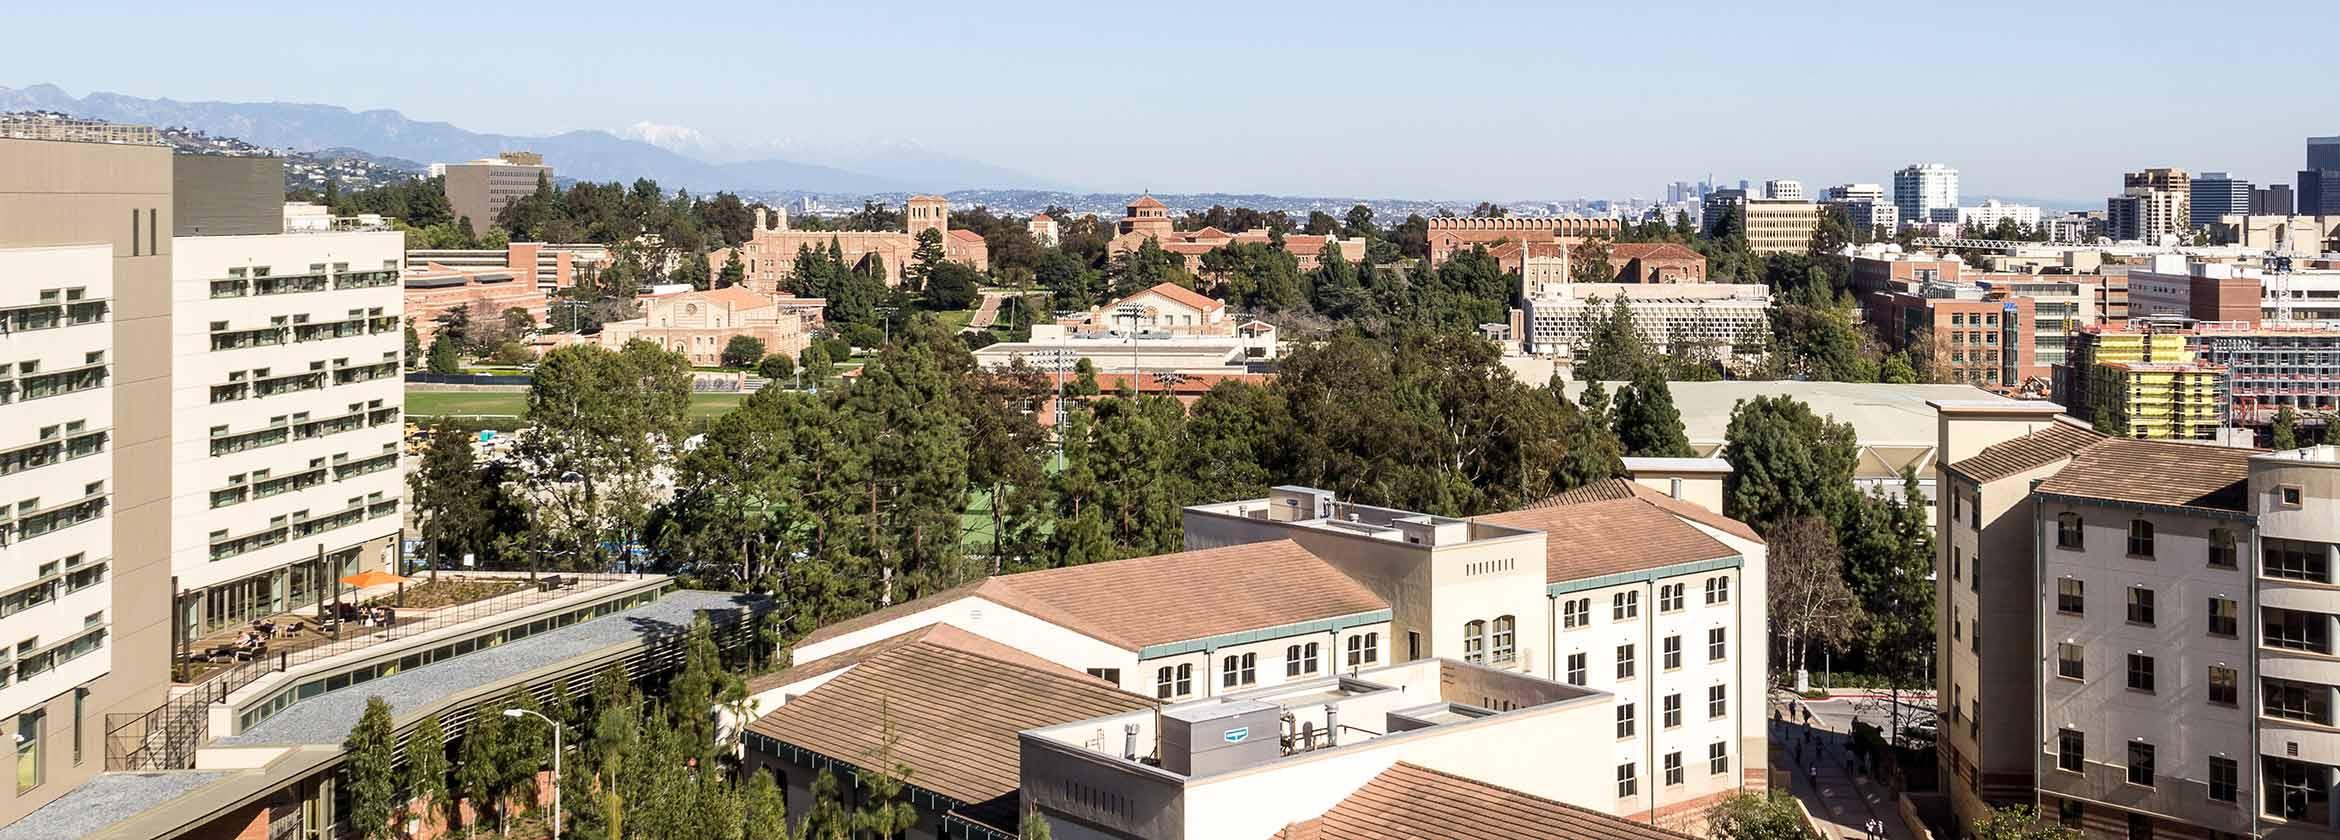 Looking out at UCLA and LA from Residential Living